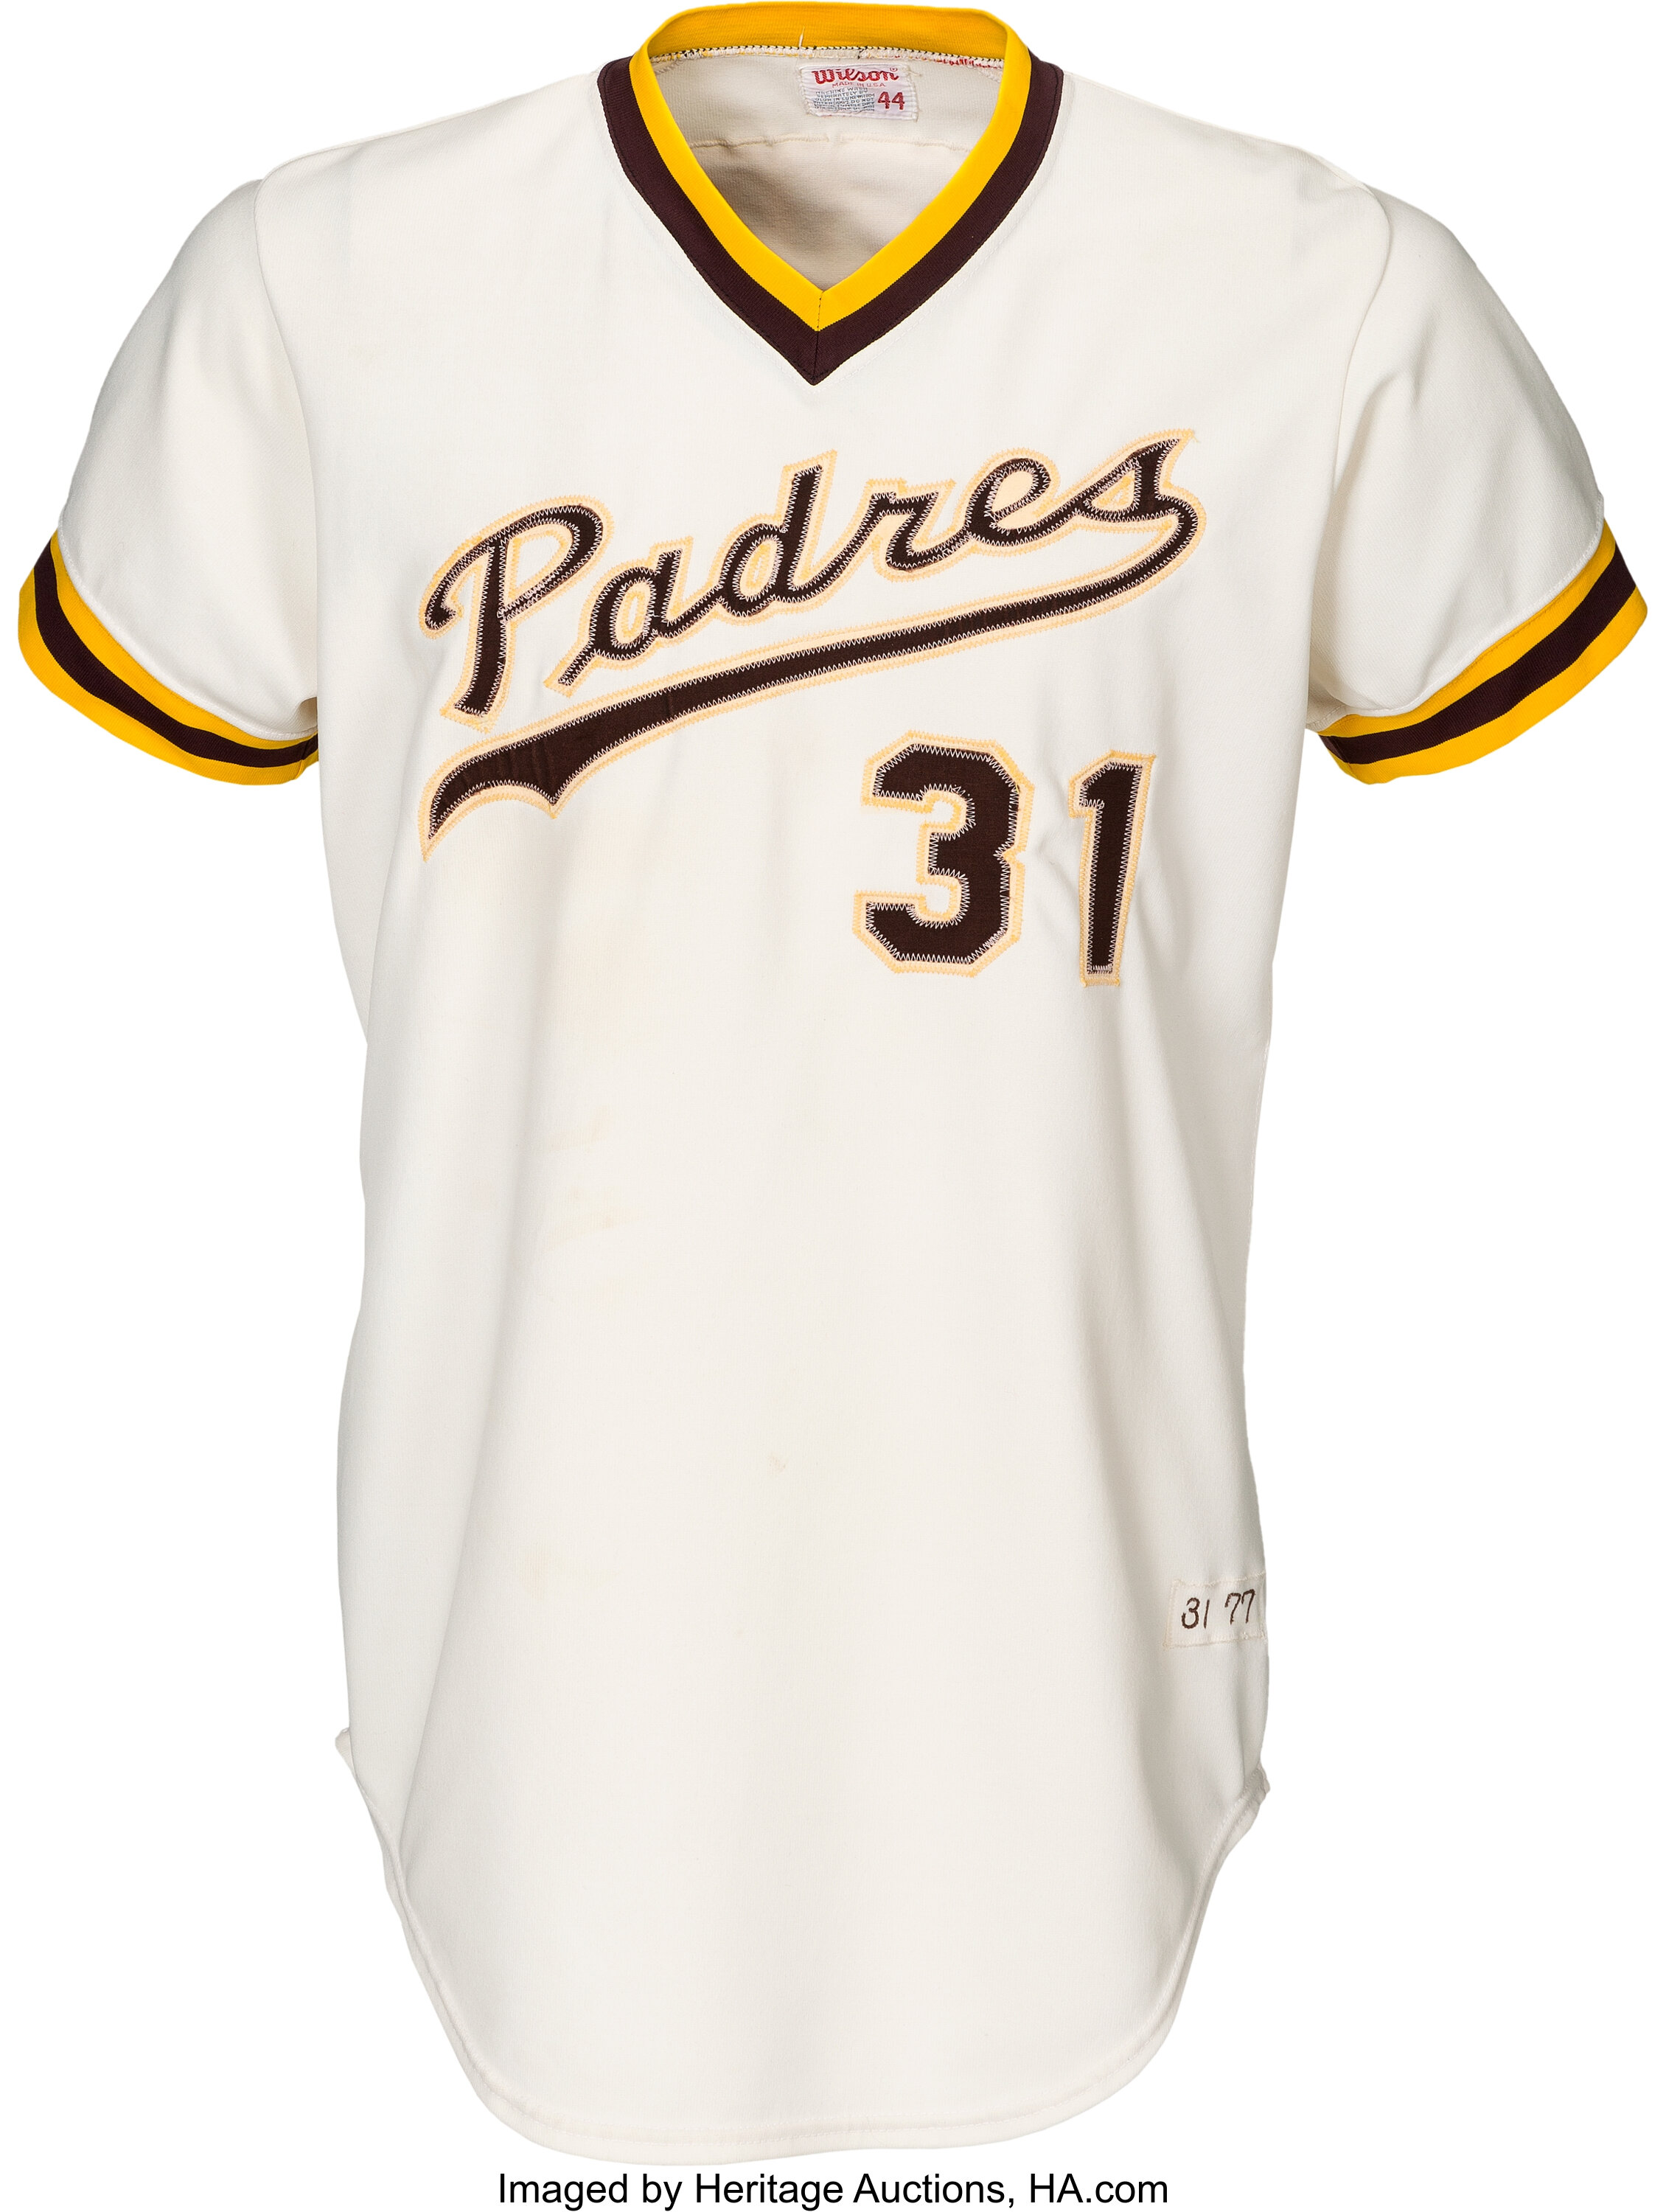 Dave Winfield Autographed Padres Jersey - SWIT Sports